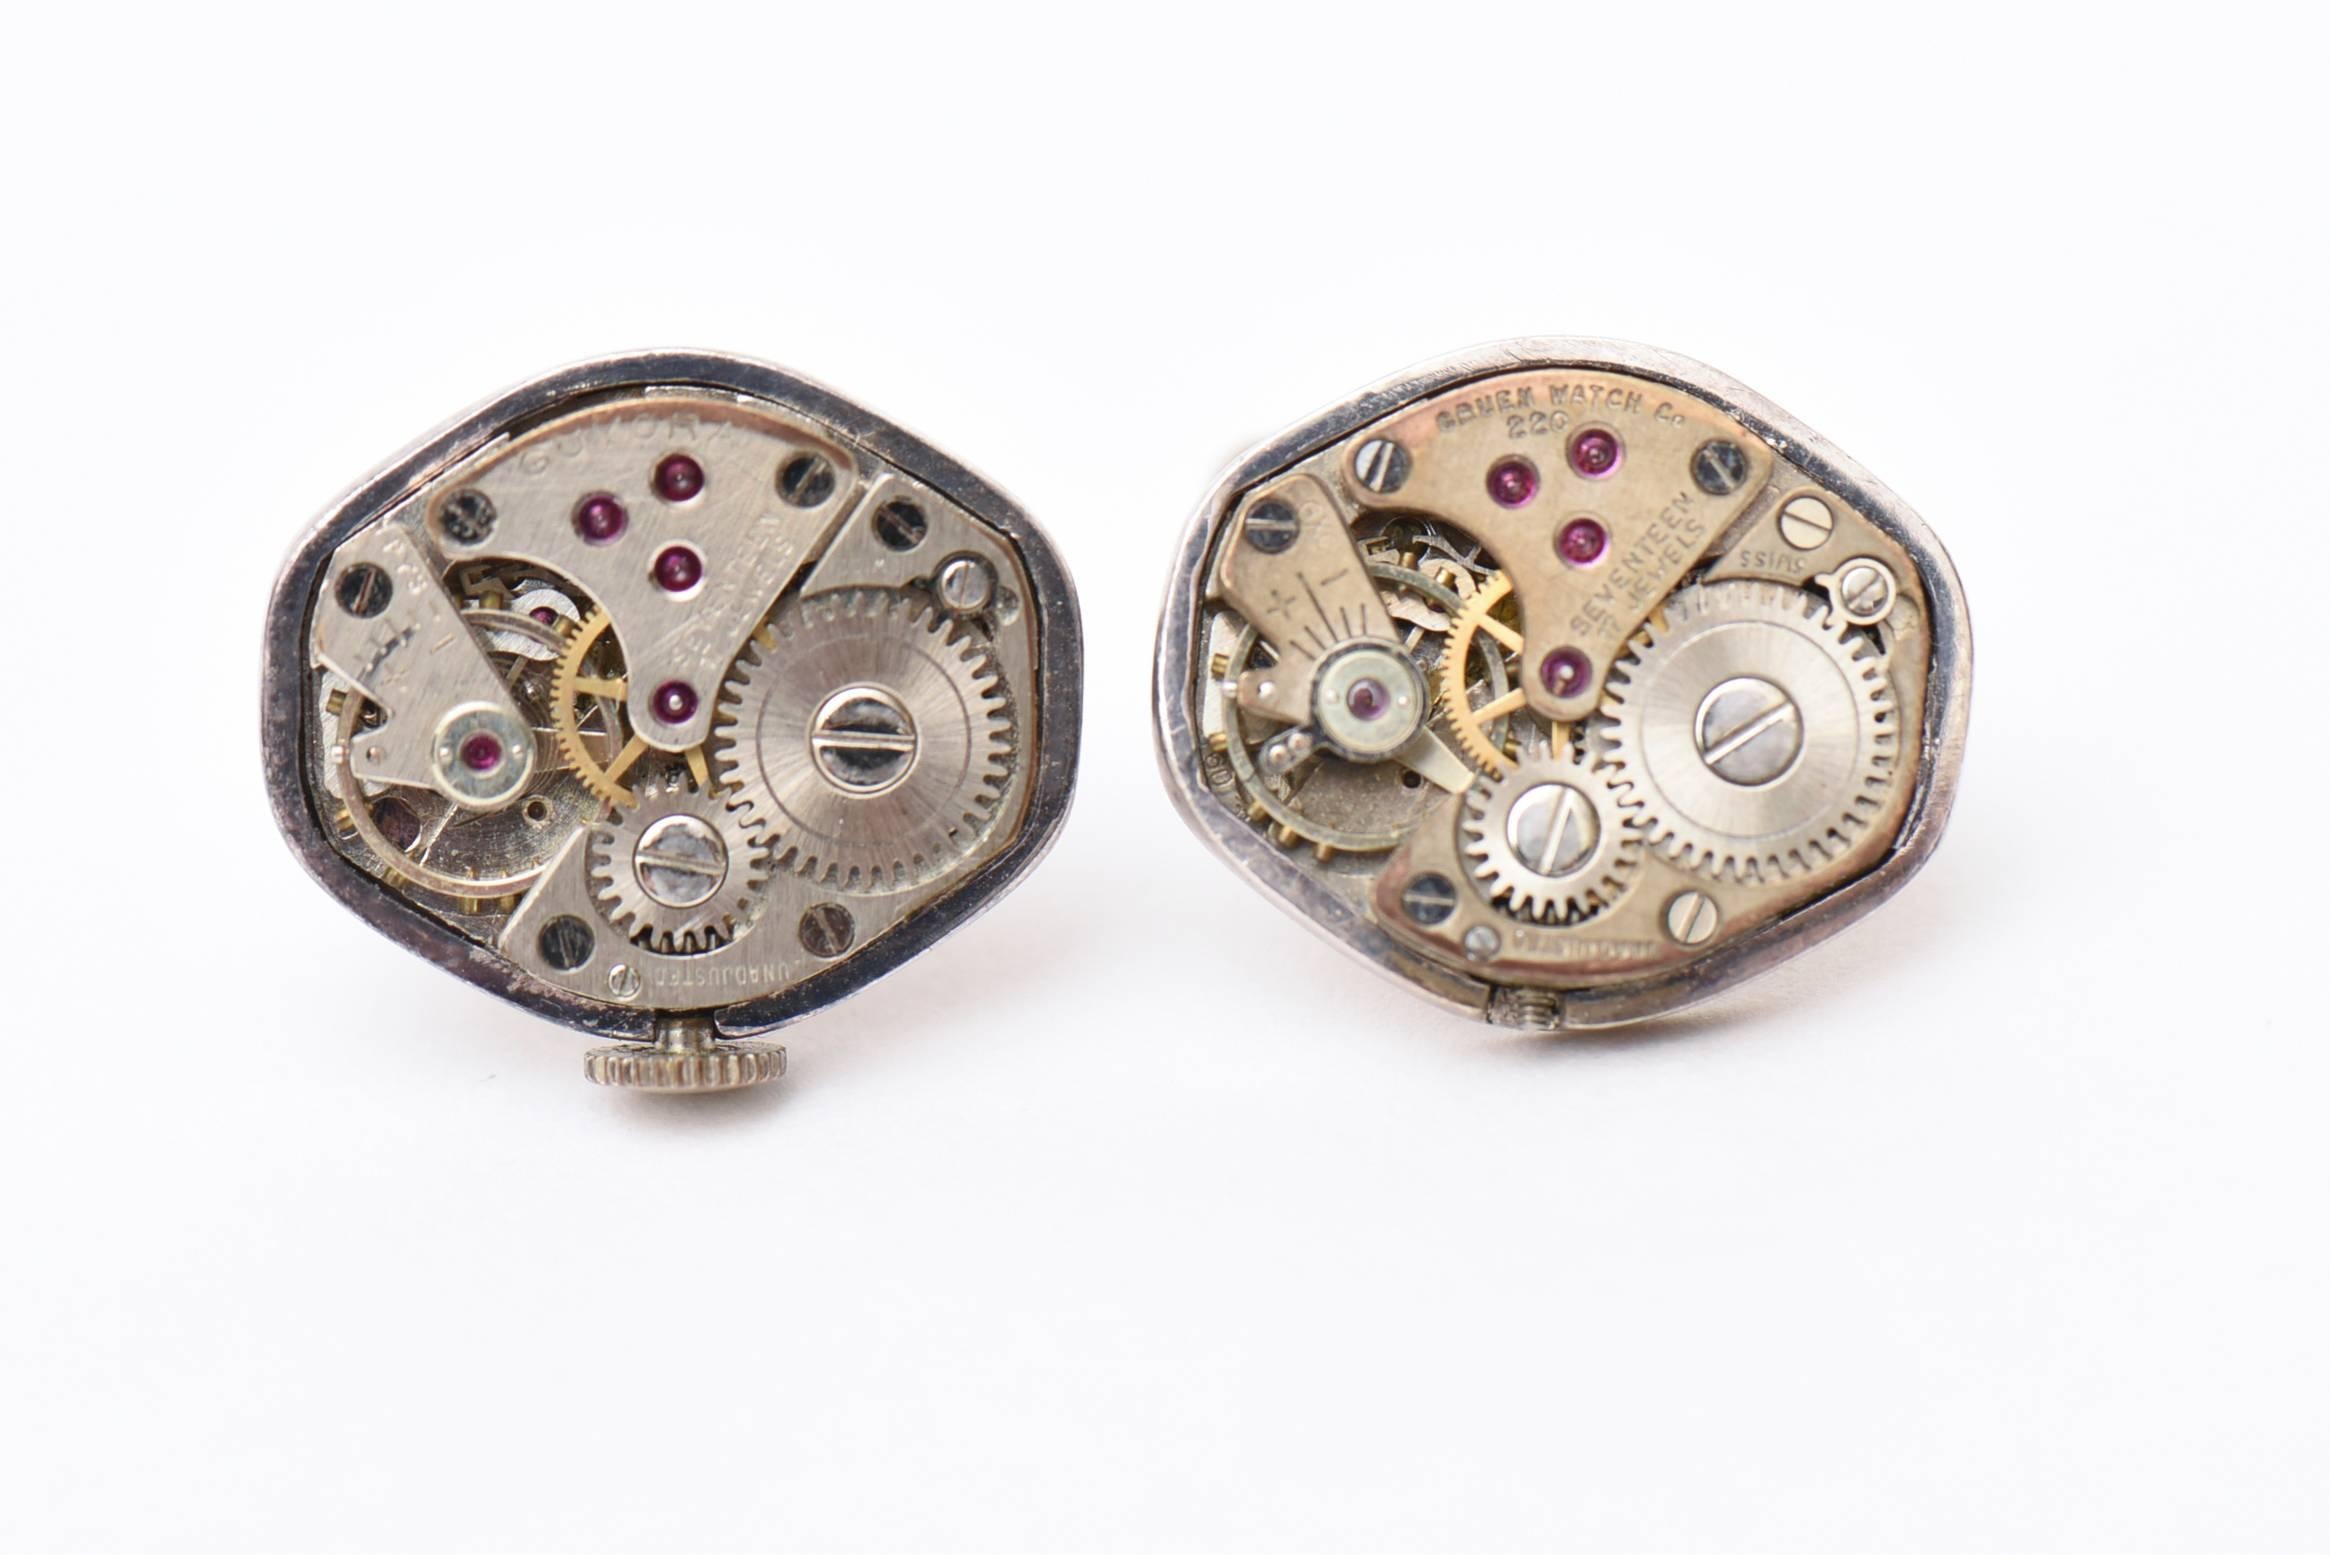 These intricate and moveable watch parts fascinate the eye. These cufflinks are most unusual and are jeweler made. They are one of a kind. Fascinating workmanship involved in making these cufflinks. They are marked Sterling silver 925 SWISS and